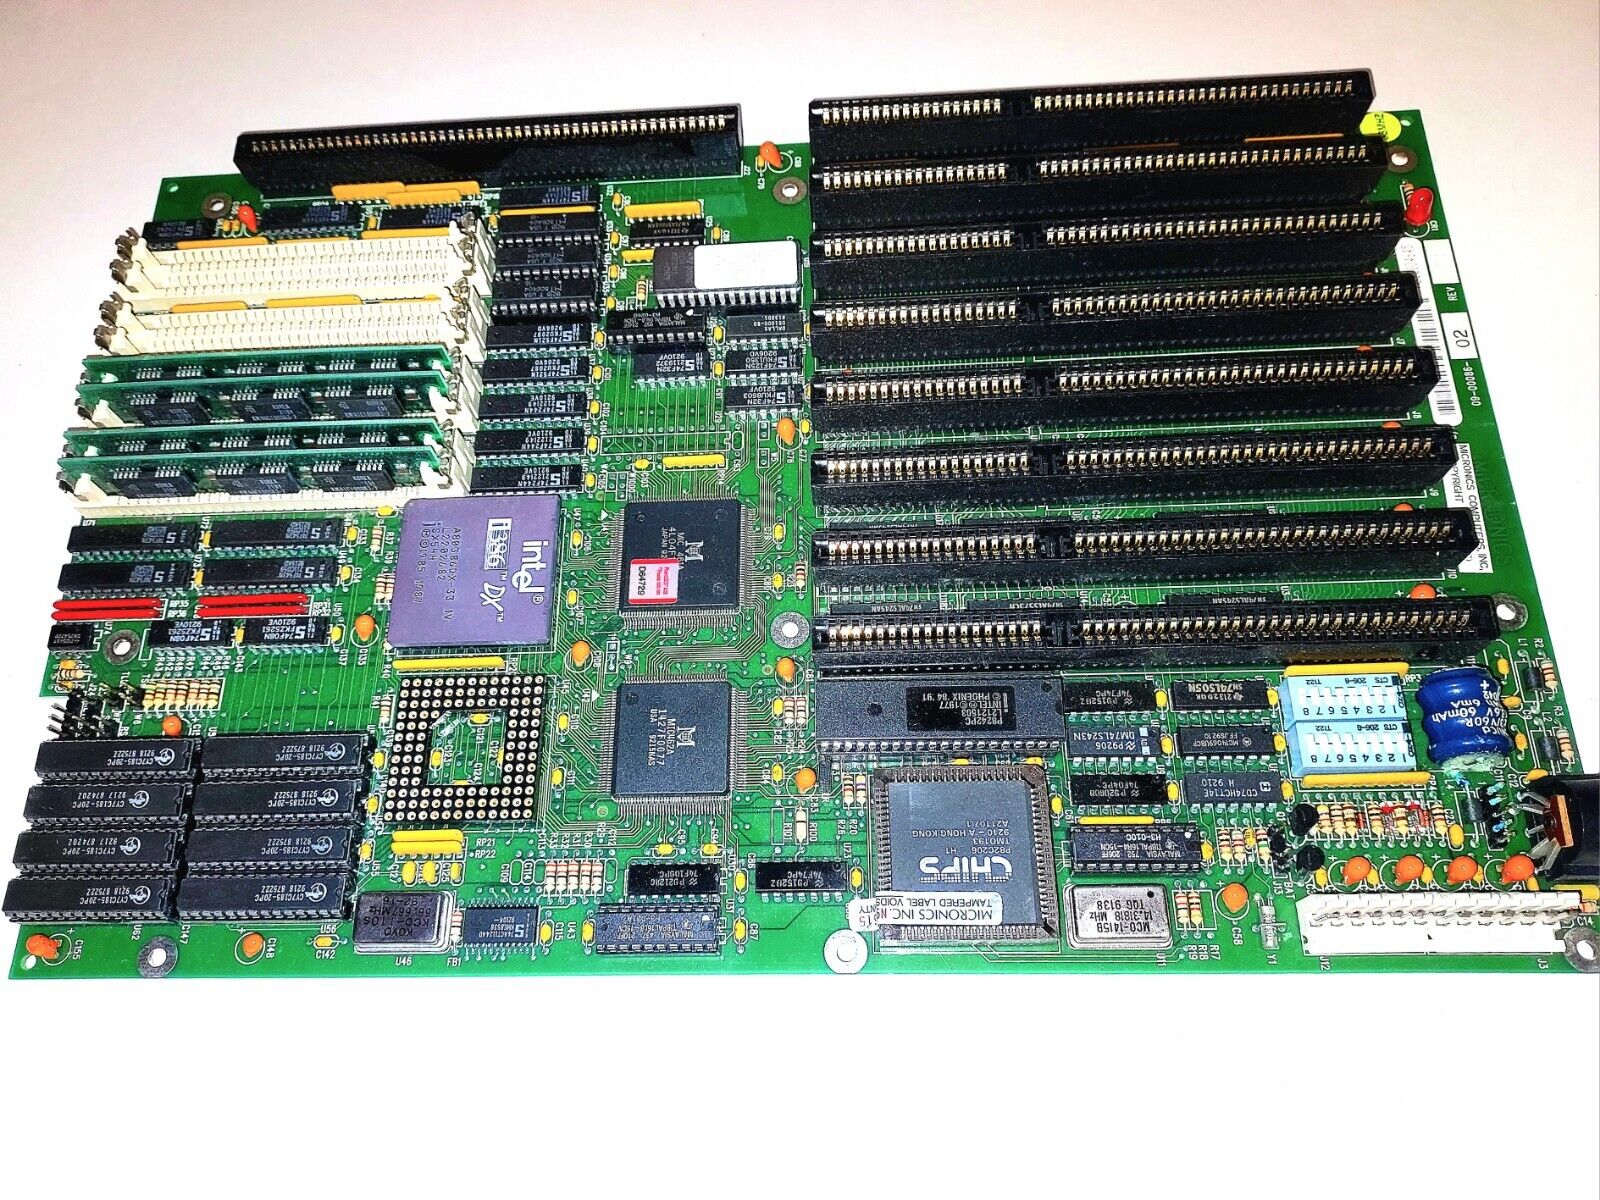 Micronics 09-00086 Rev E1 AT Motherboard 33mhz i386 DX Rare Vintage (Untested)